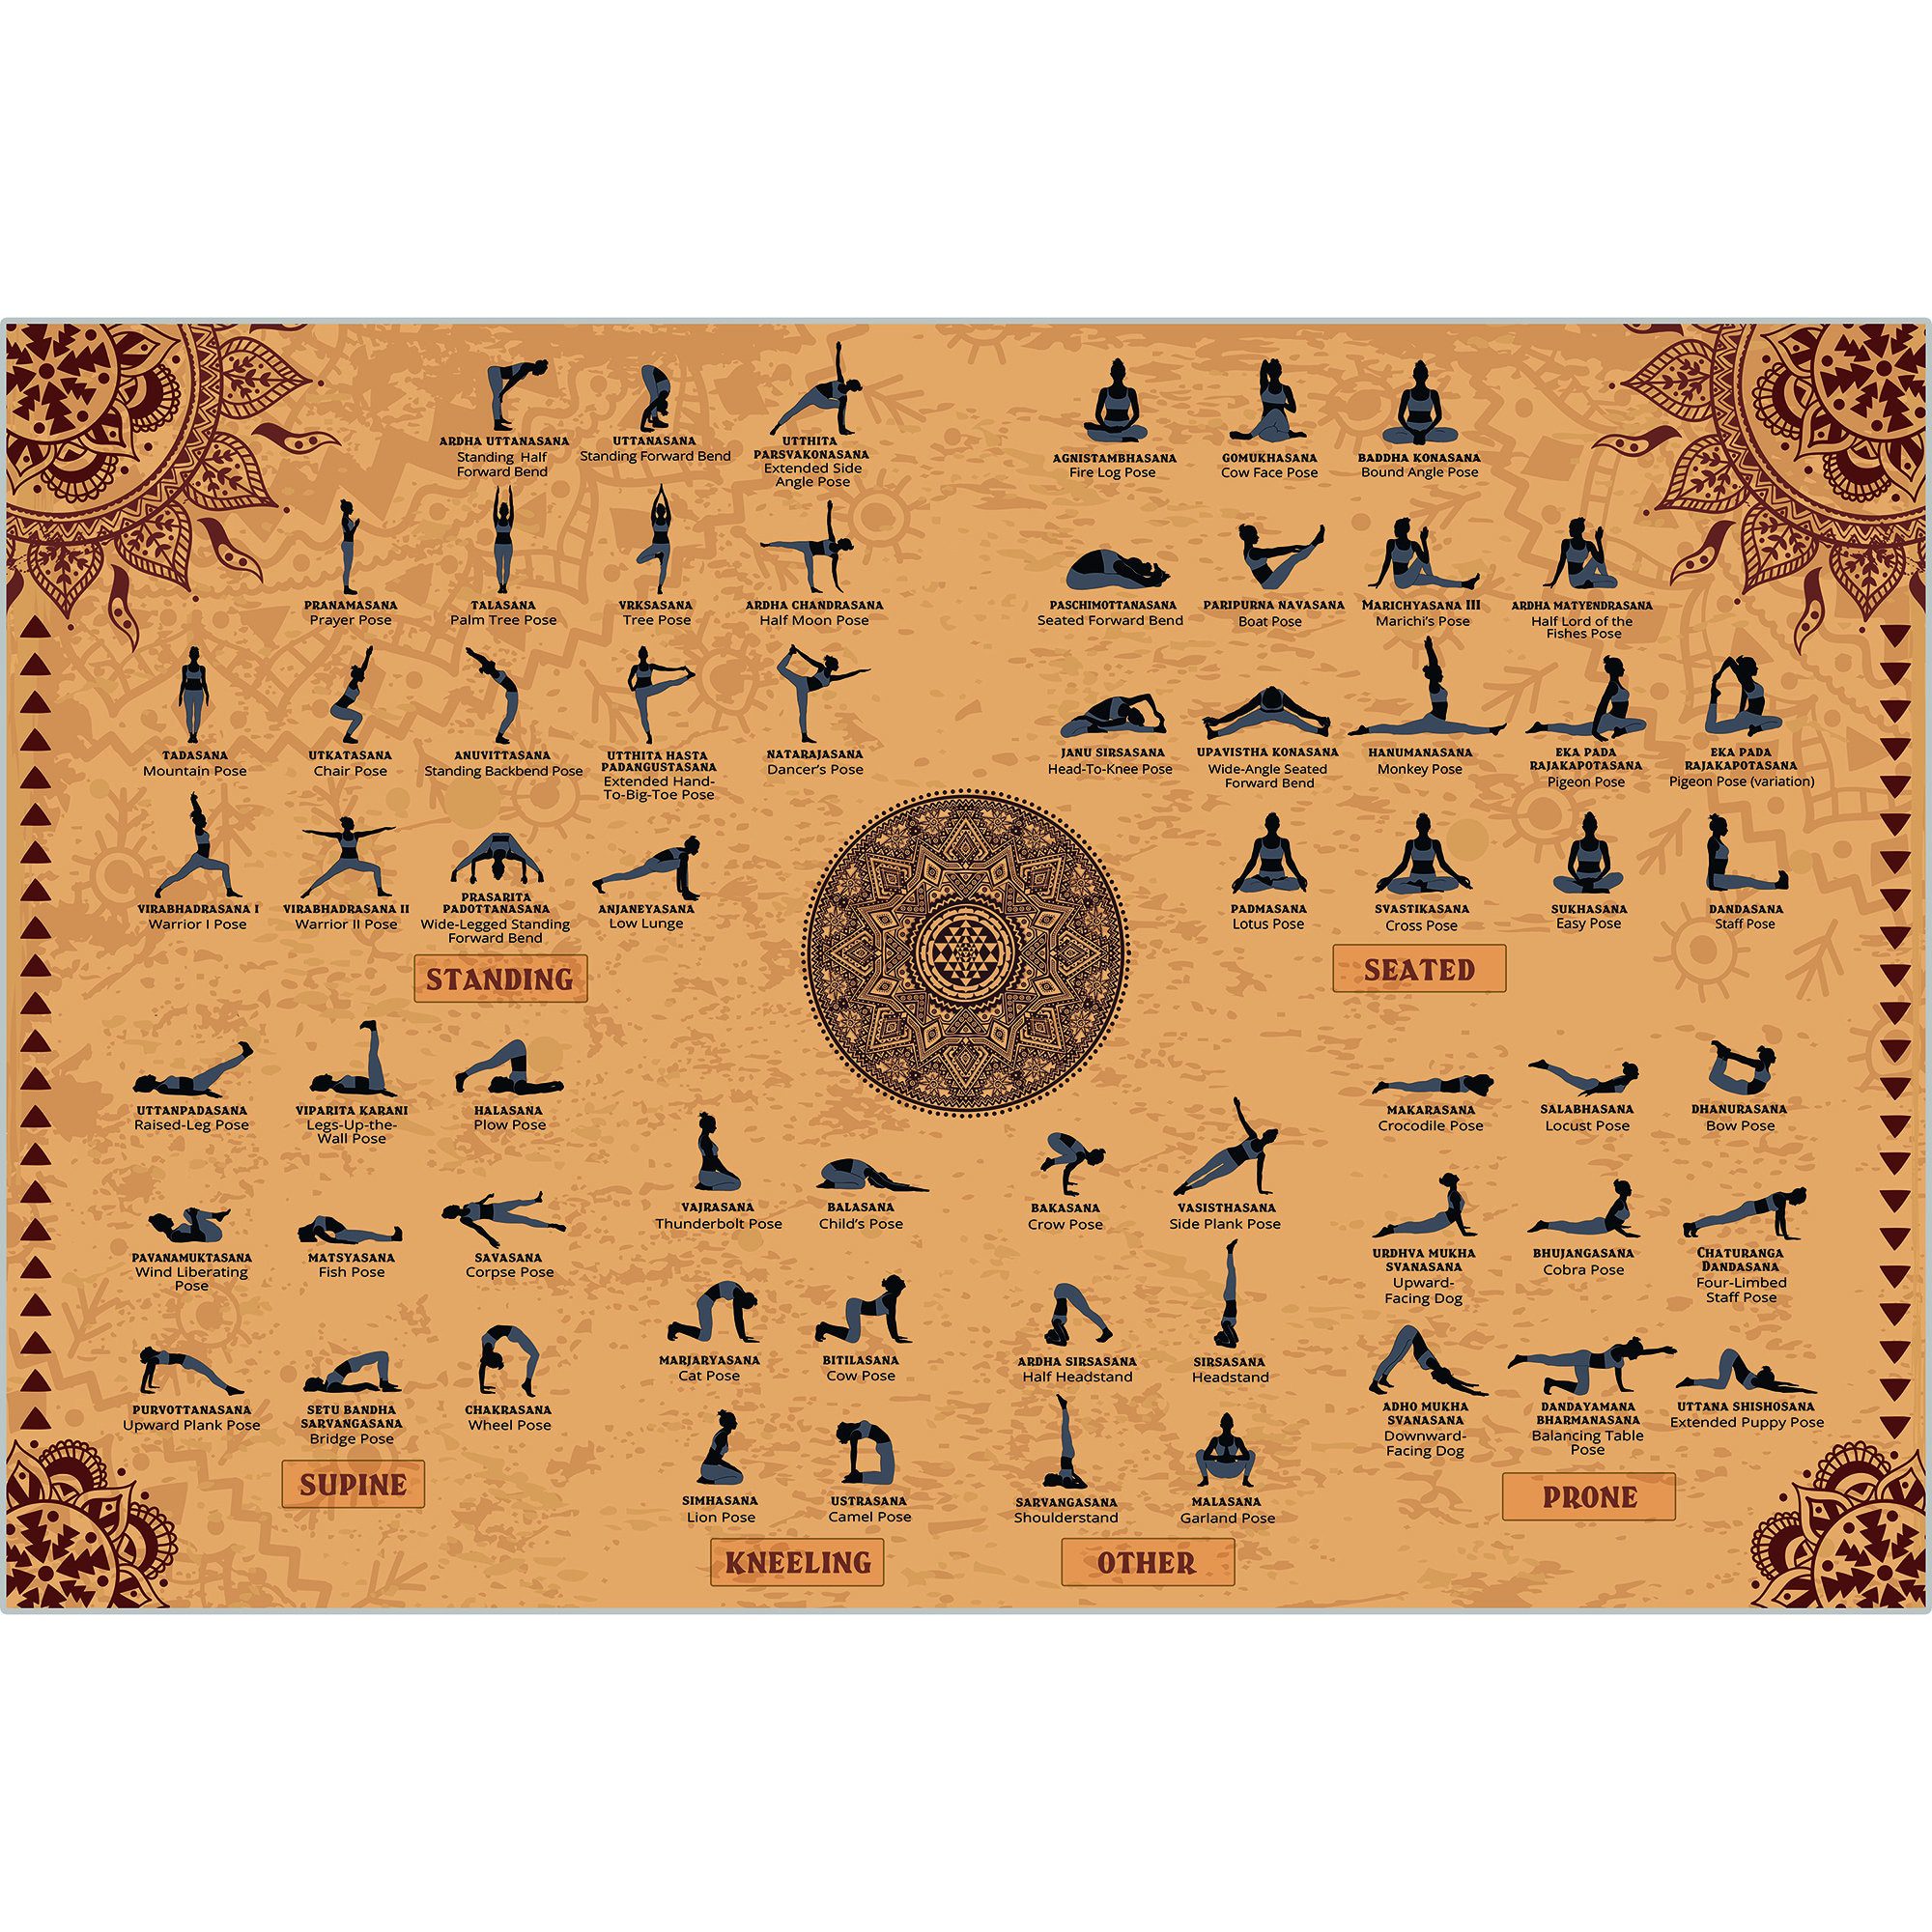 100,000 Yoga poster Vector Images | Depositphotos